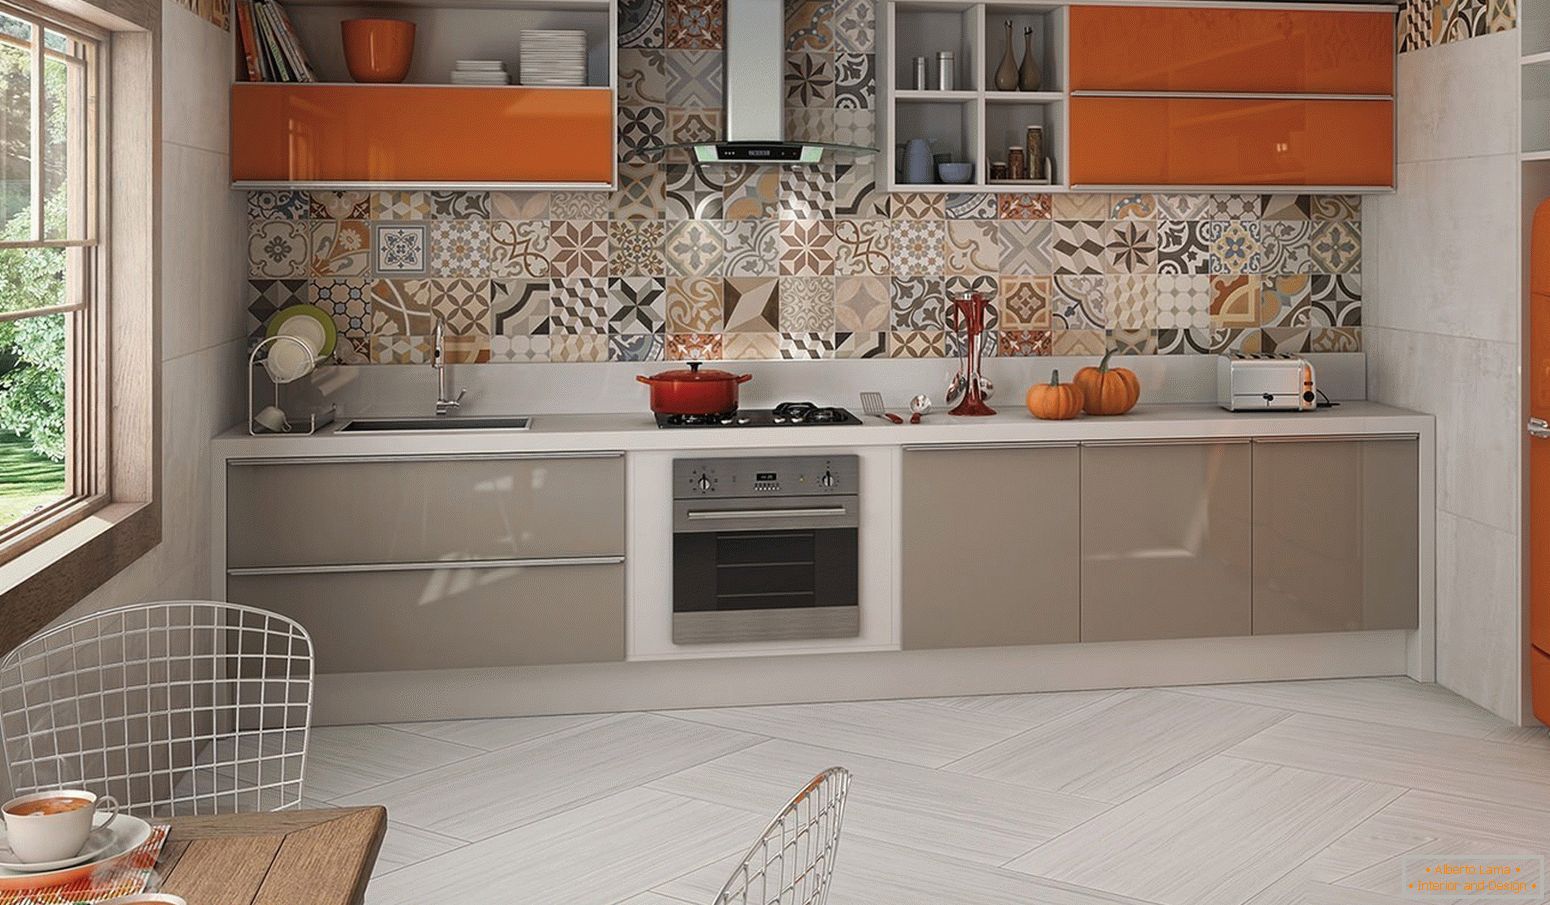 Apron of tiles in the kitchen